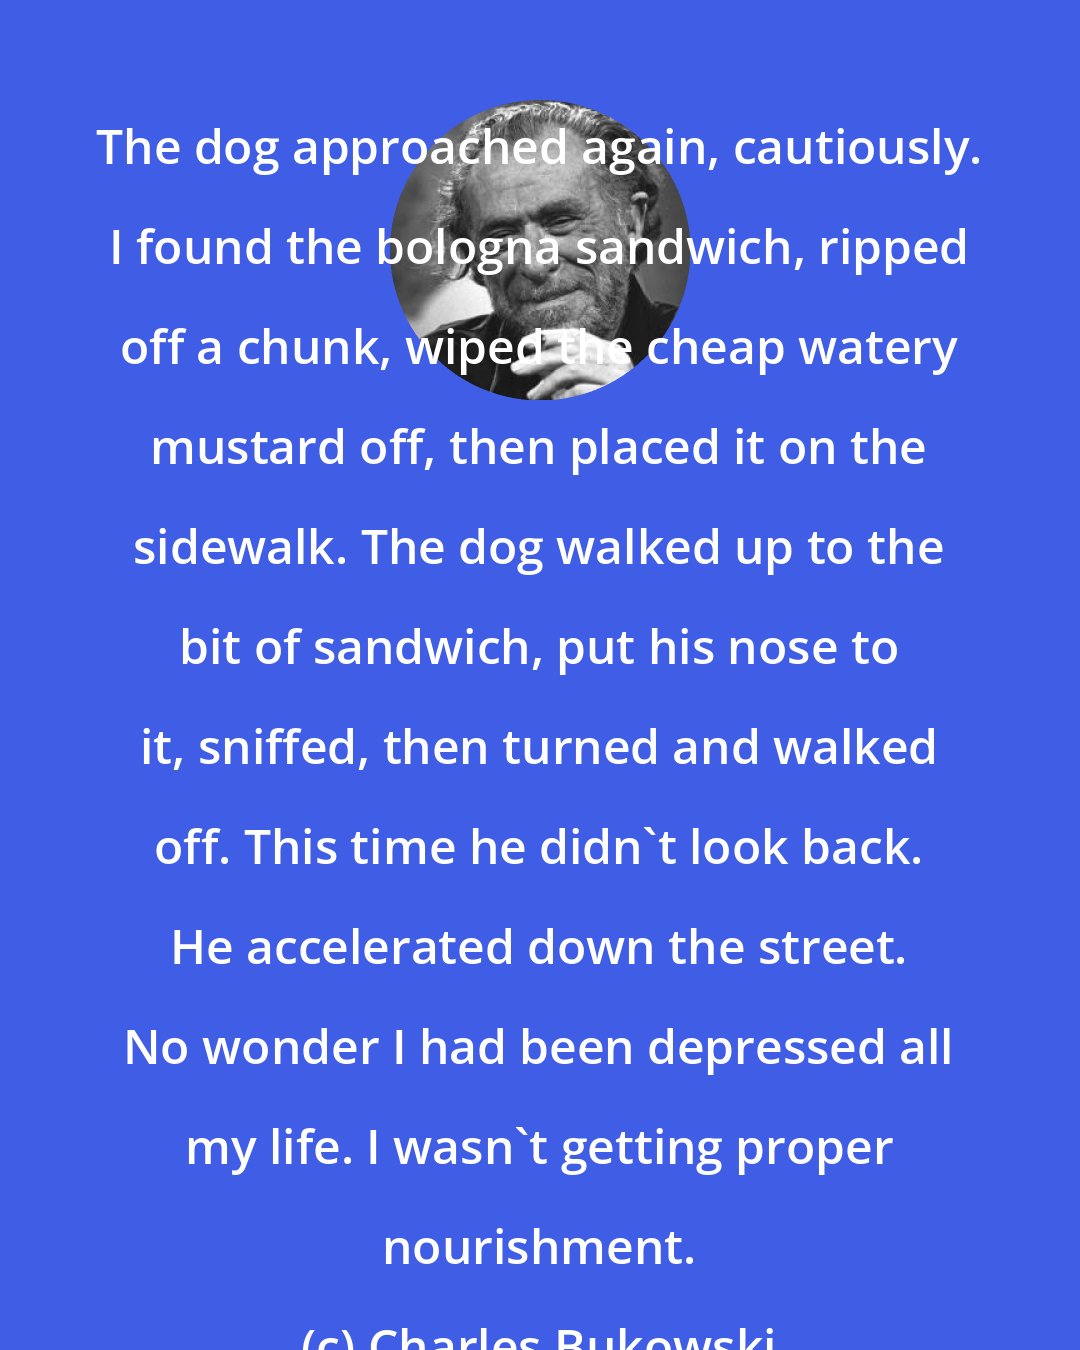 Charles Bukowski: The dog approached again, cautiously. I found the bologna sandwich, ripped off a chunk, wiped the cheap watery mustard off, then placed it on the sidewalk. The dog walked up to the bit of sandwich, put his nose to it, sniffed, then turned and walked off. This time he didn't look back. He accelerated down the street. No wonder I had been depressed all my life. I wasn't getting proper nourishment.